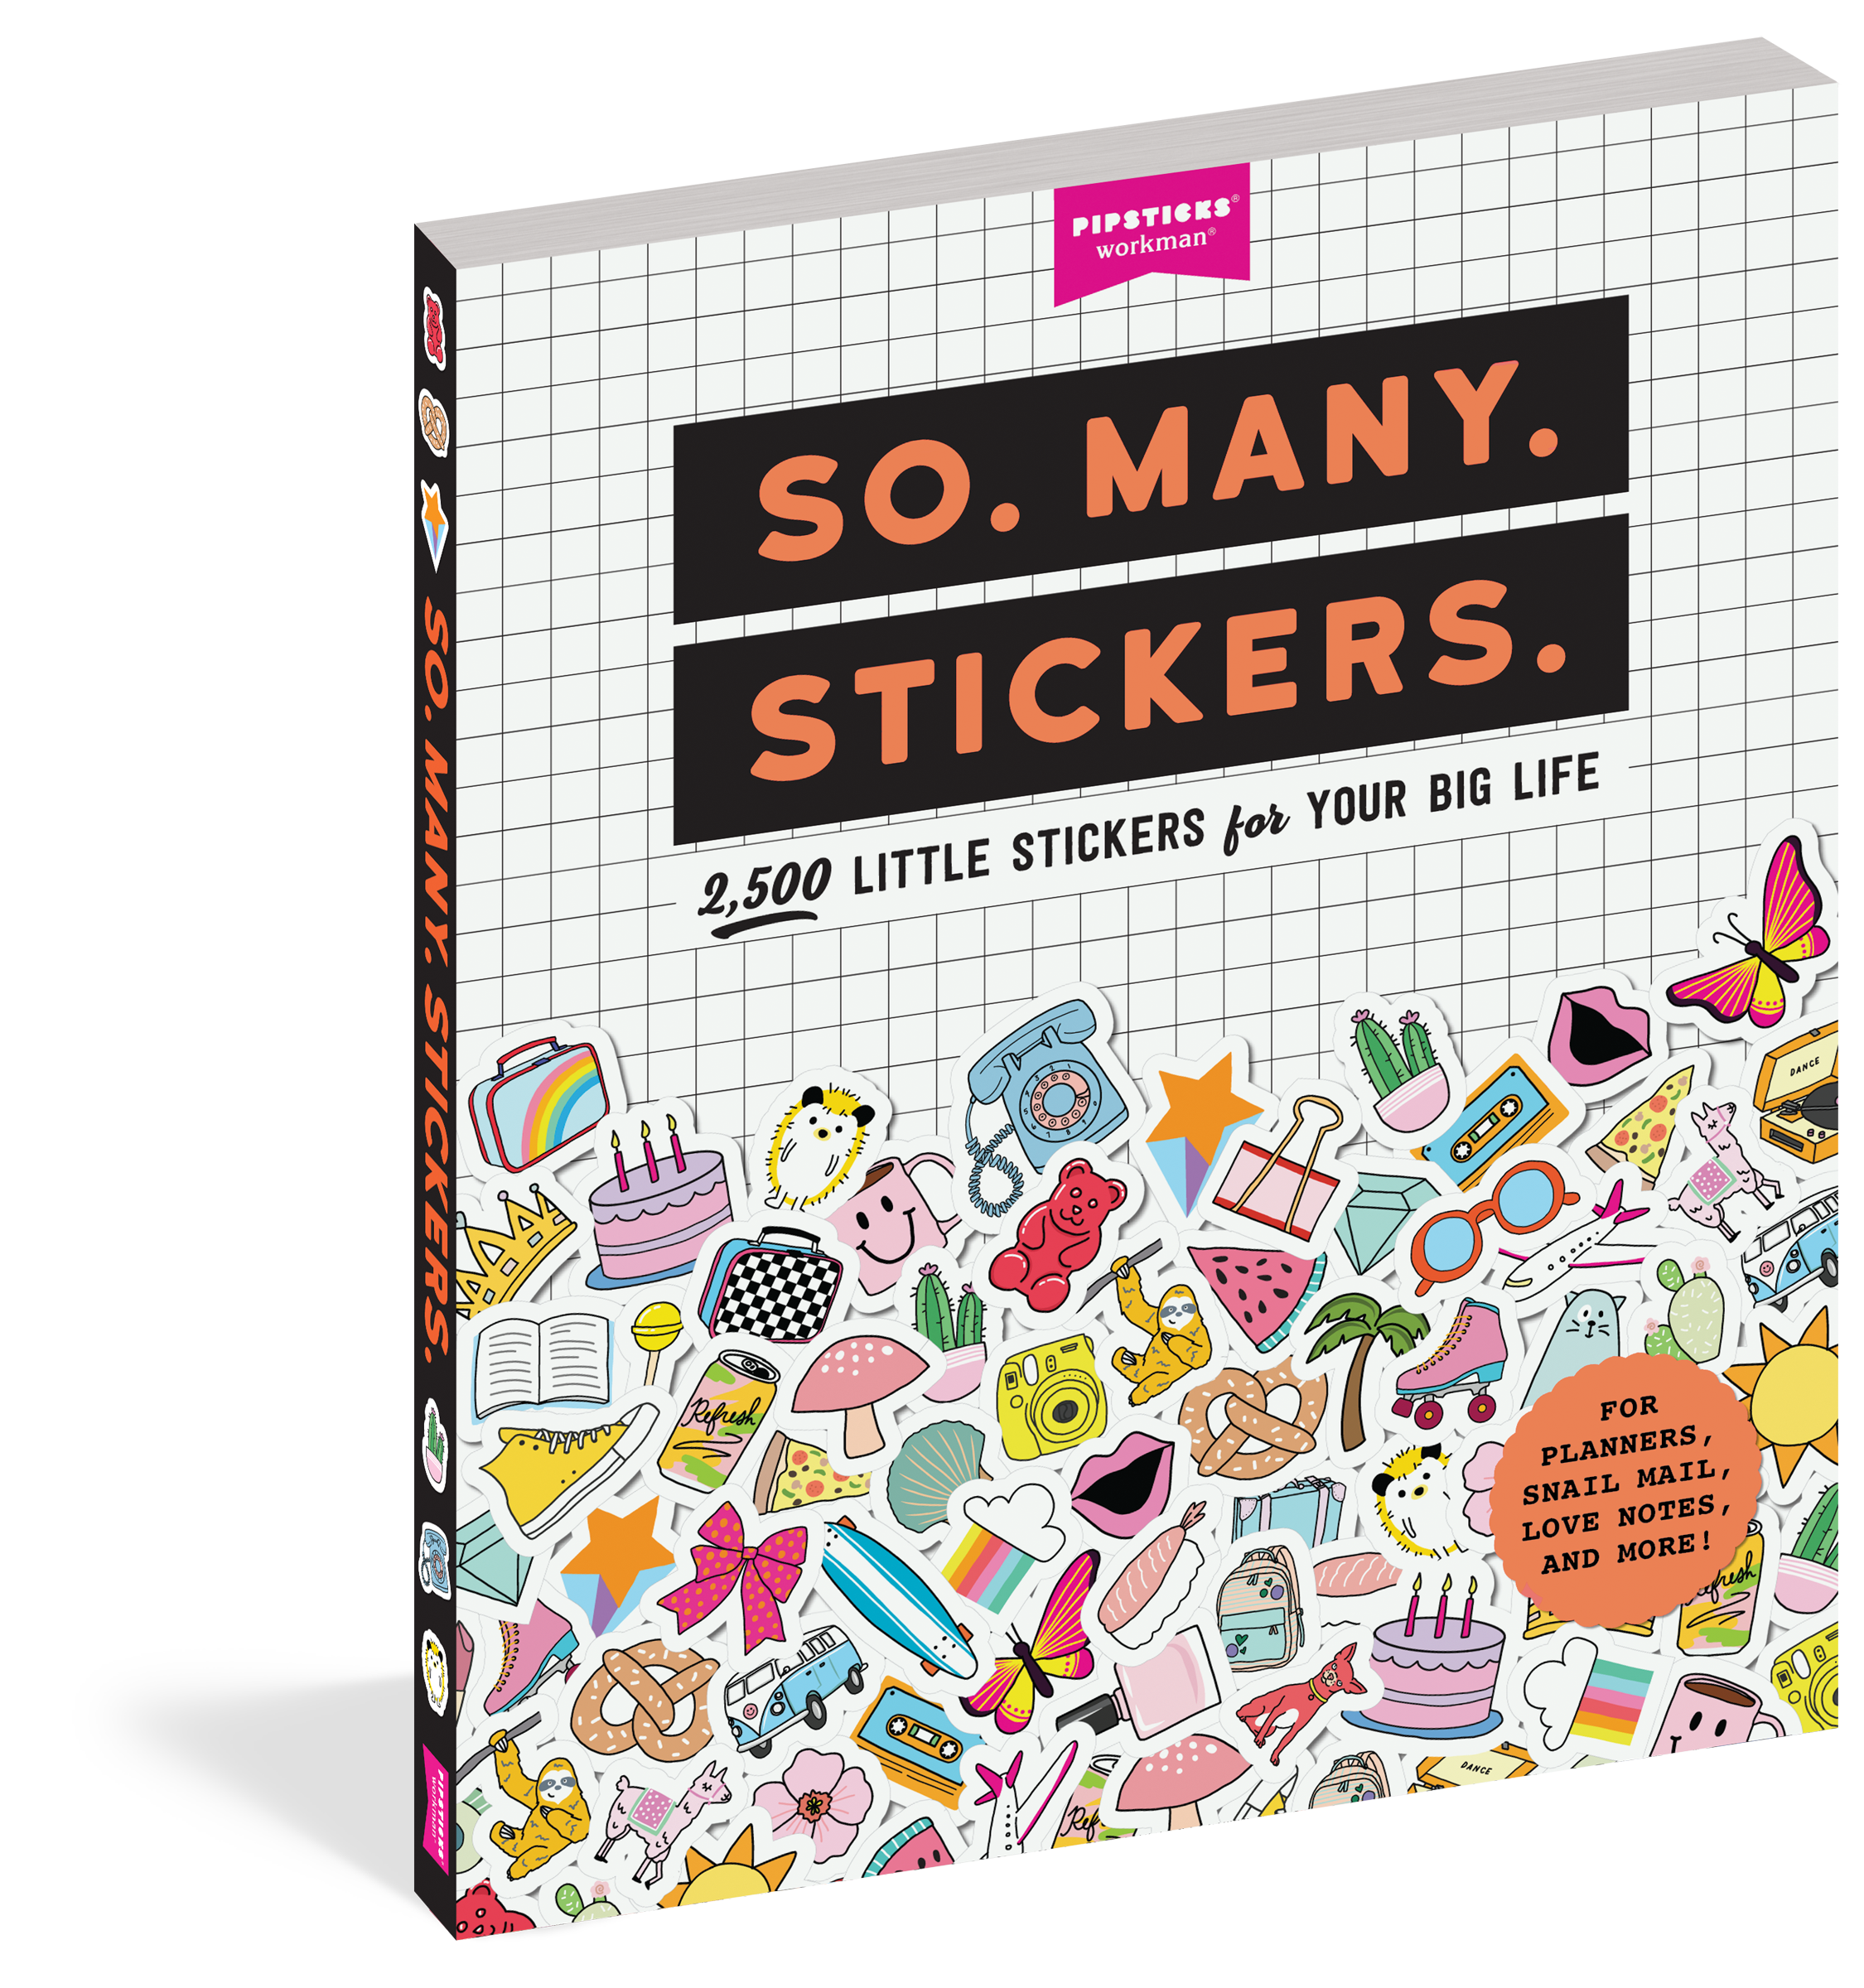 So. Many. Stickers. - 2,500 Little Stickers For Your Big Life    